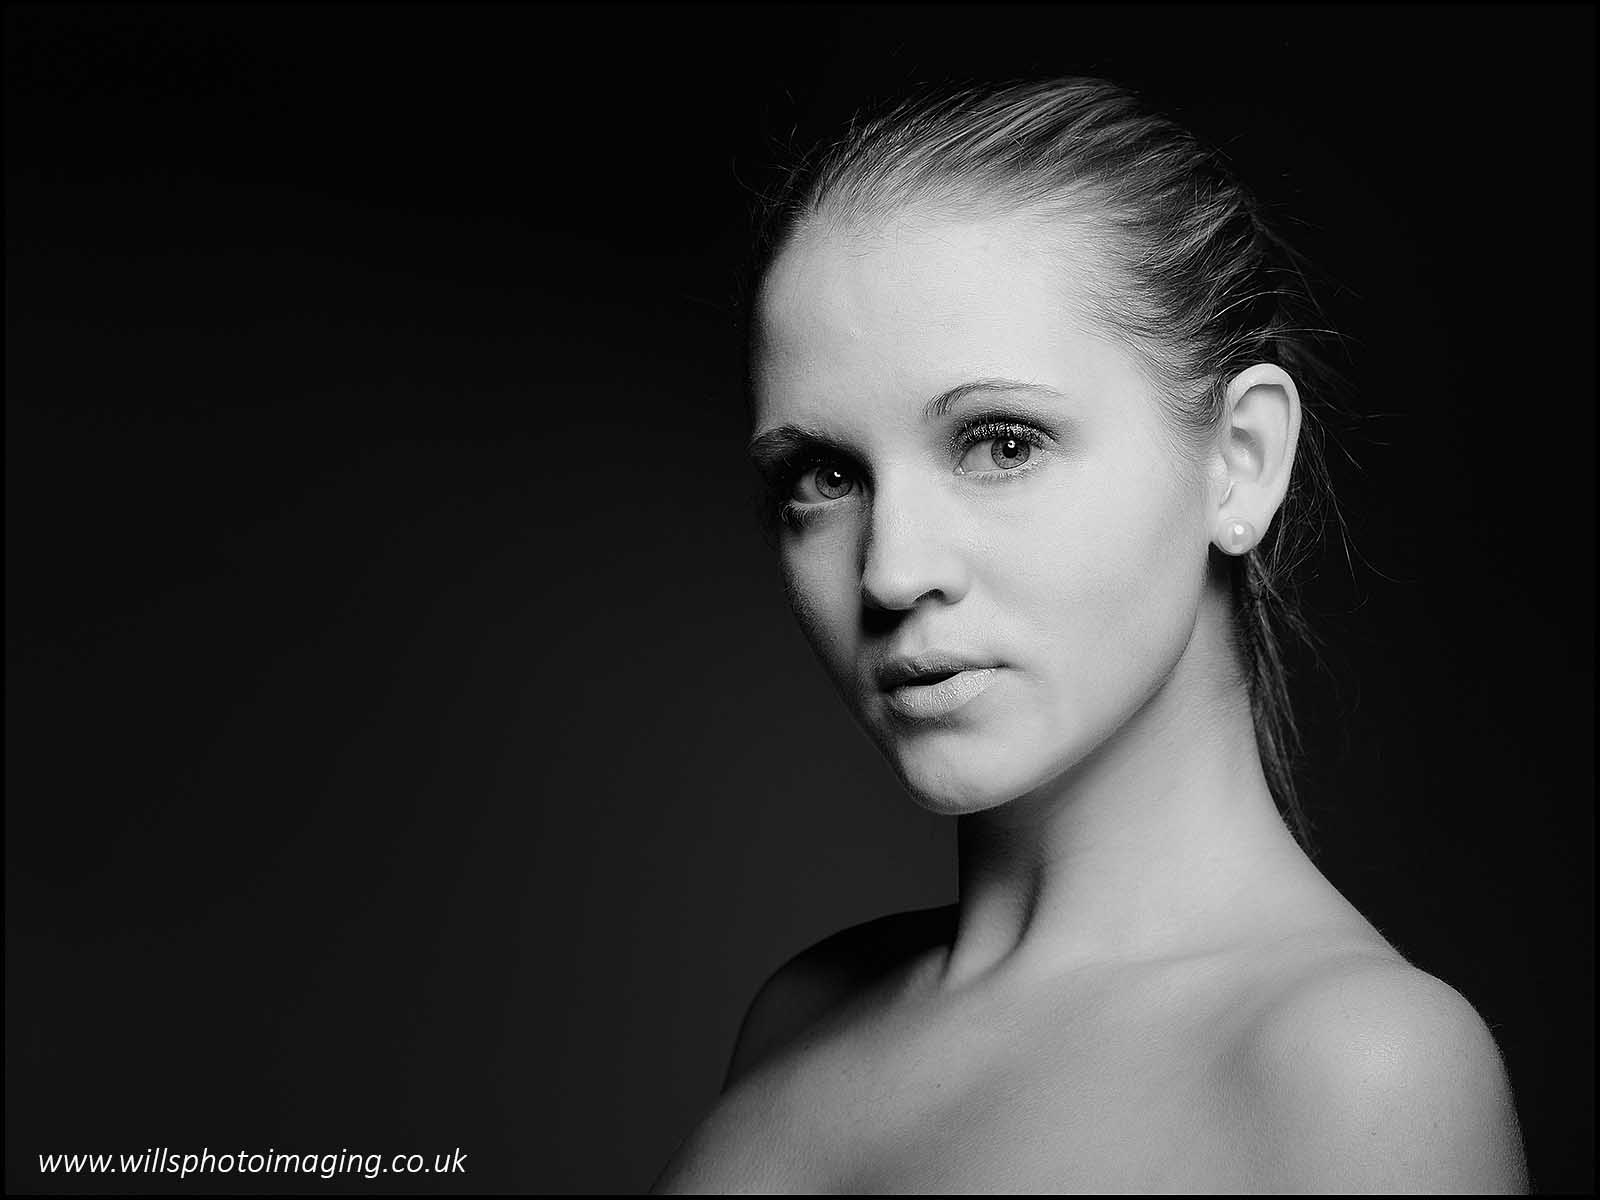 Classy and distinctive monochrome noir portrait photograph of a bare shouldered woman with a pearl earring